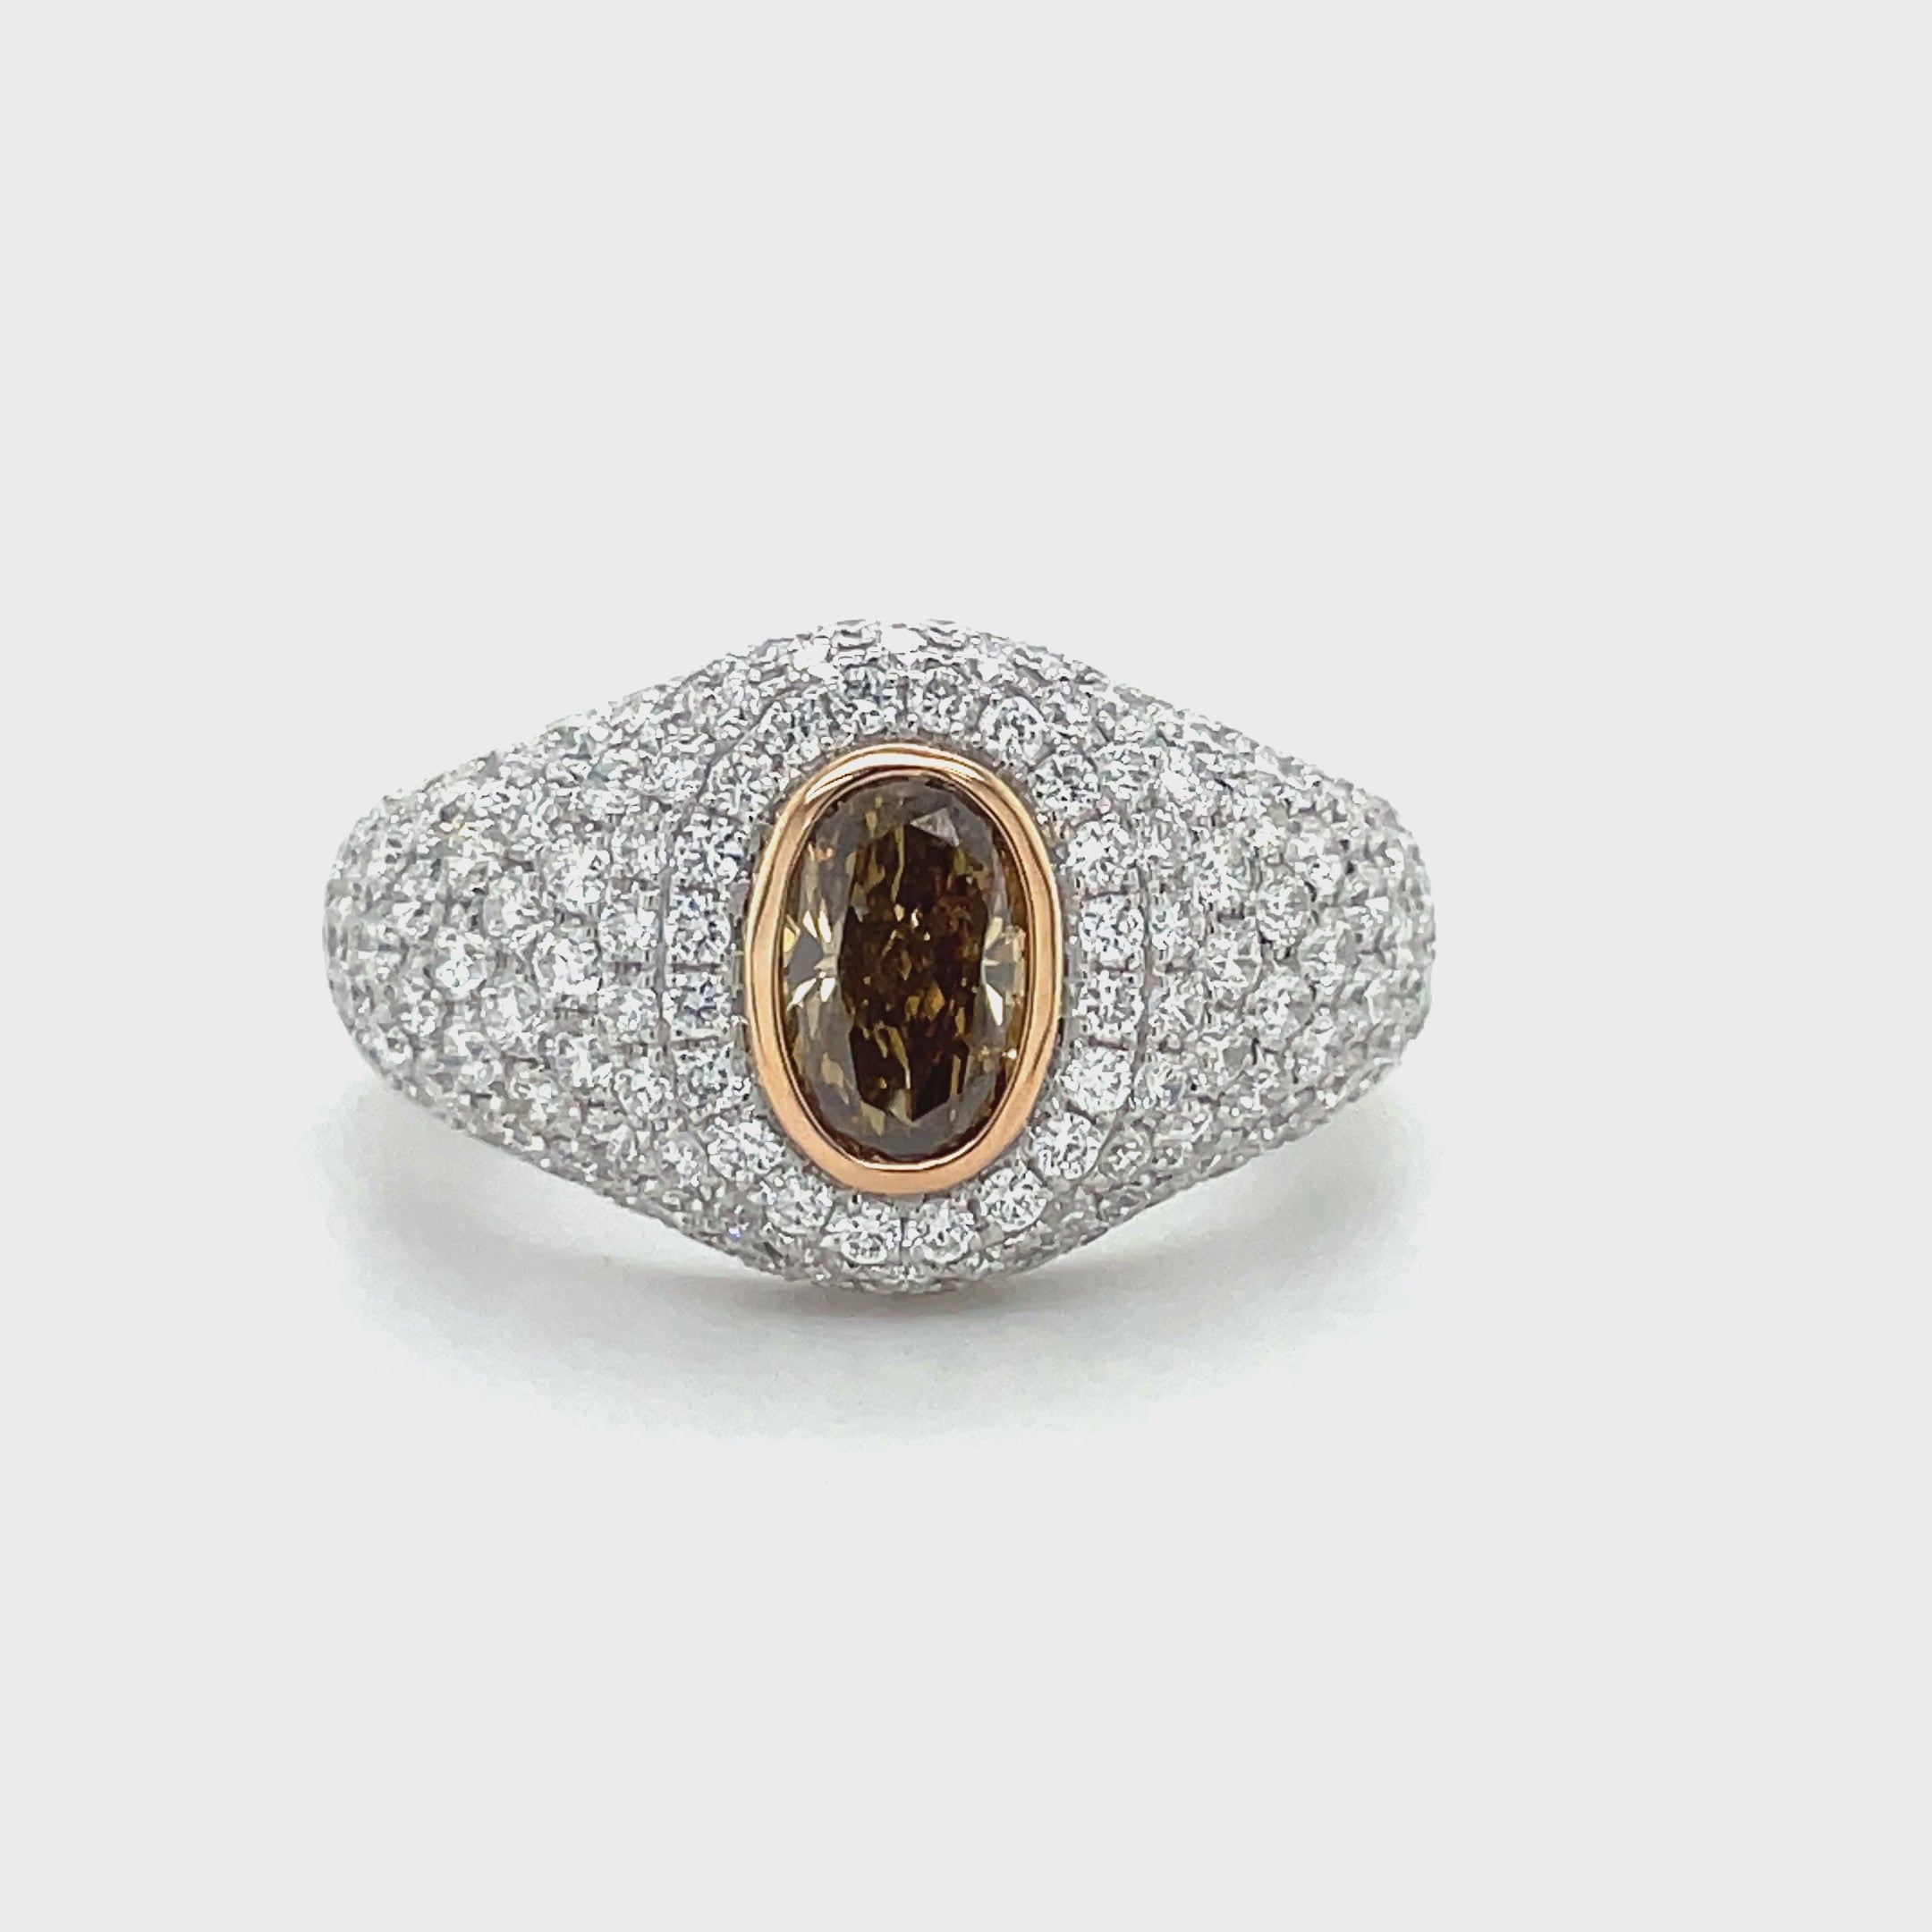 A champagne diamond is a type of colored diamond that’s naturally brown, with a noticeable yellow tint.   Set in 18k white gold.  Round white diamonds 1.44 cts bezel set in 18k yellow gold.  One oval champagne diamond 0.55 cts